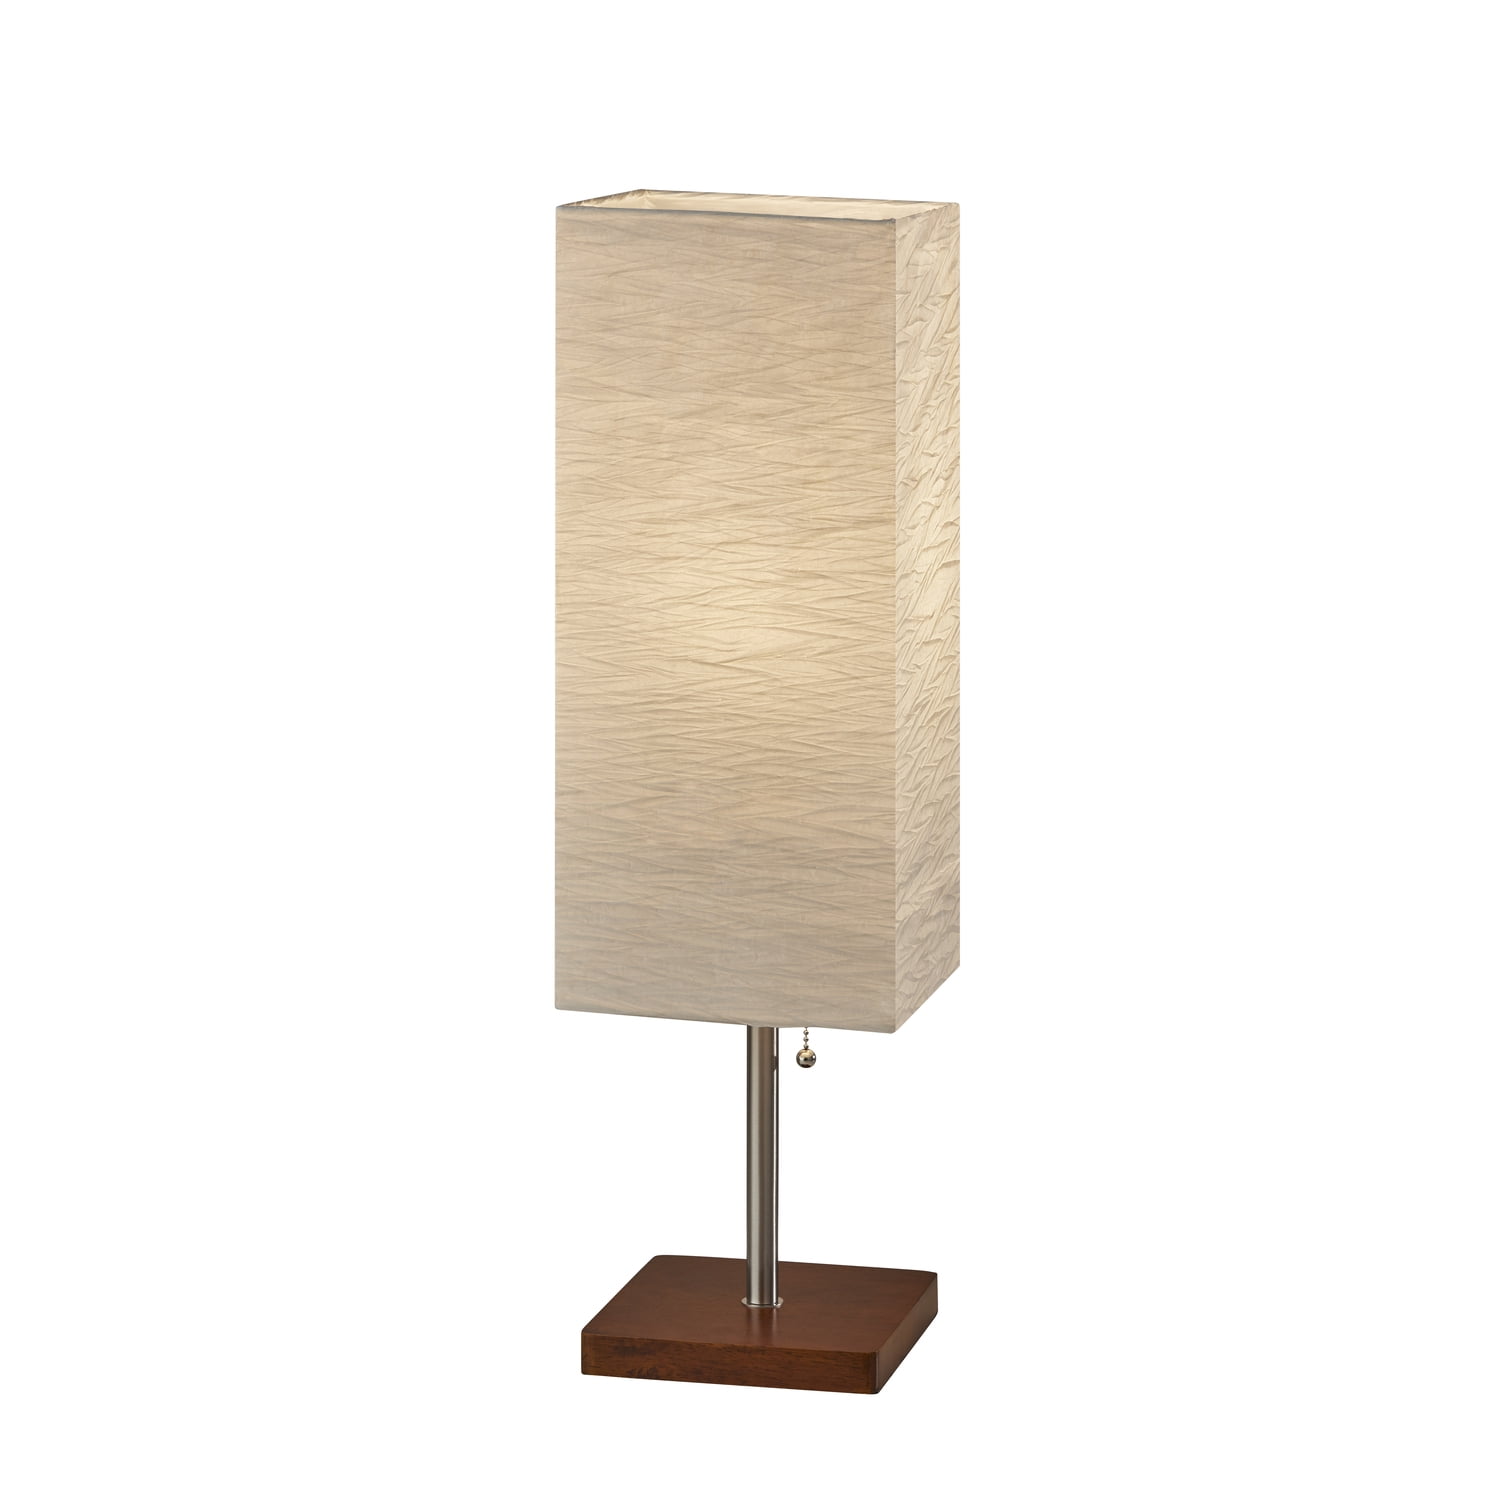 Adesso Dune Table Lamp Brushed Steel, Adesso Brushed Steel Table Lamp